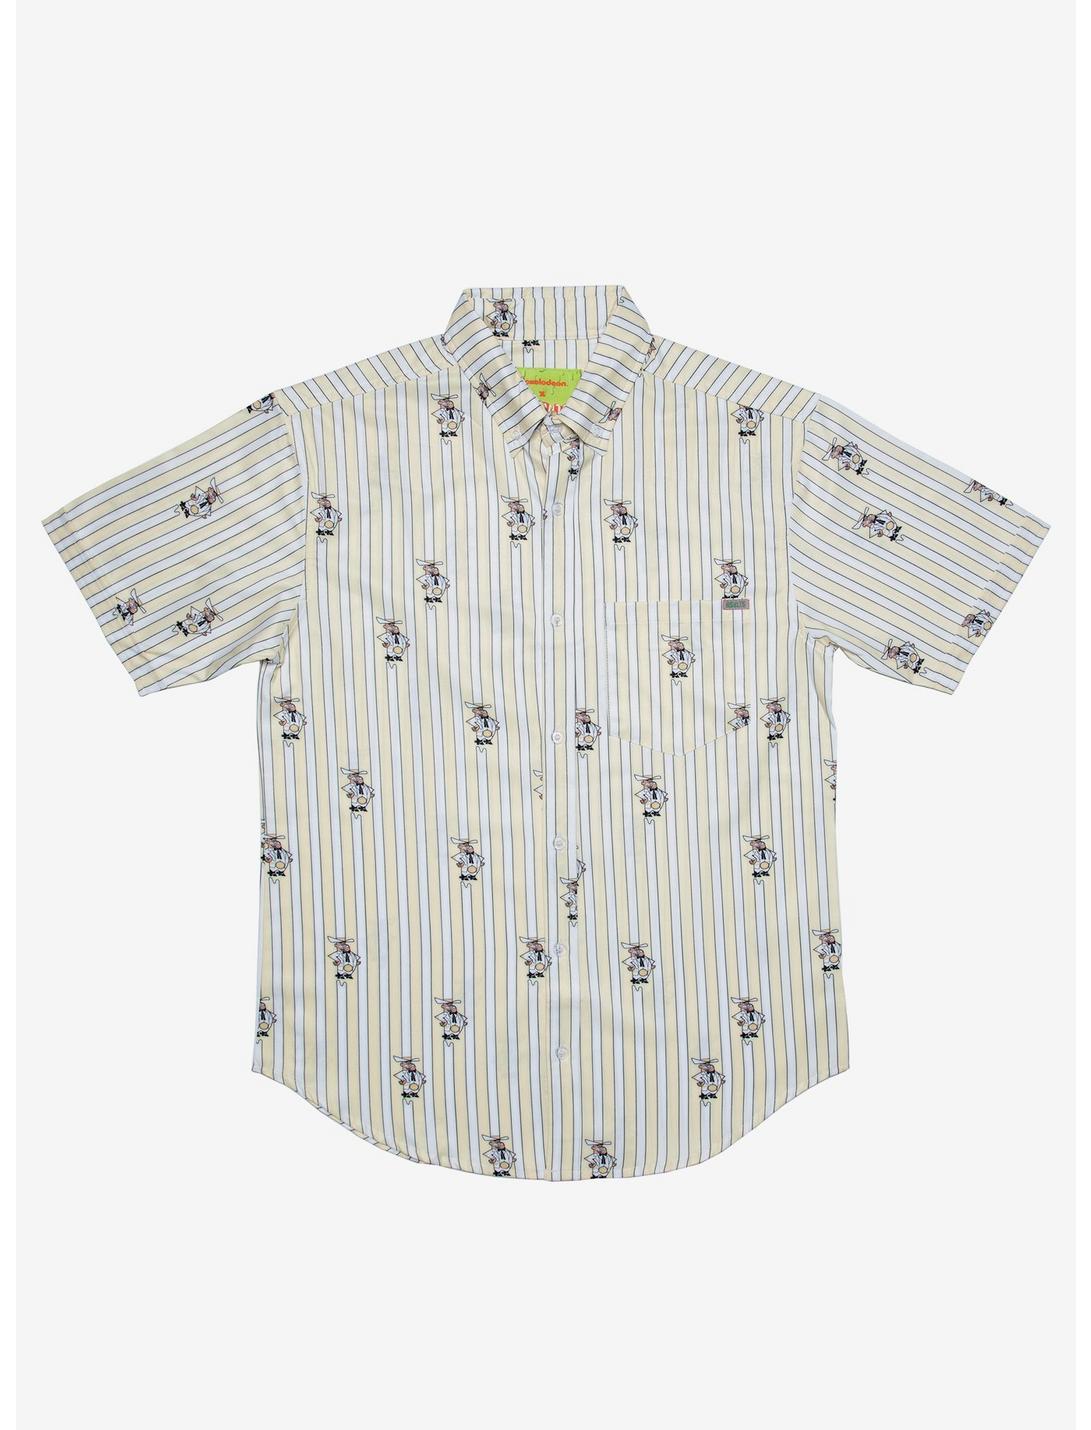 RSVLTS Fairly OddParents DimmaDarn Woven Button-Up, WHITE, hi-res